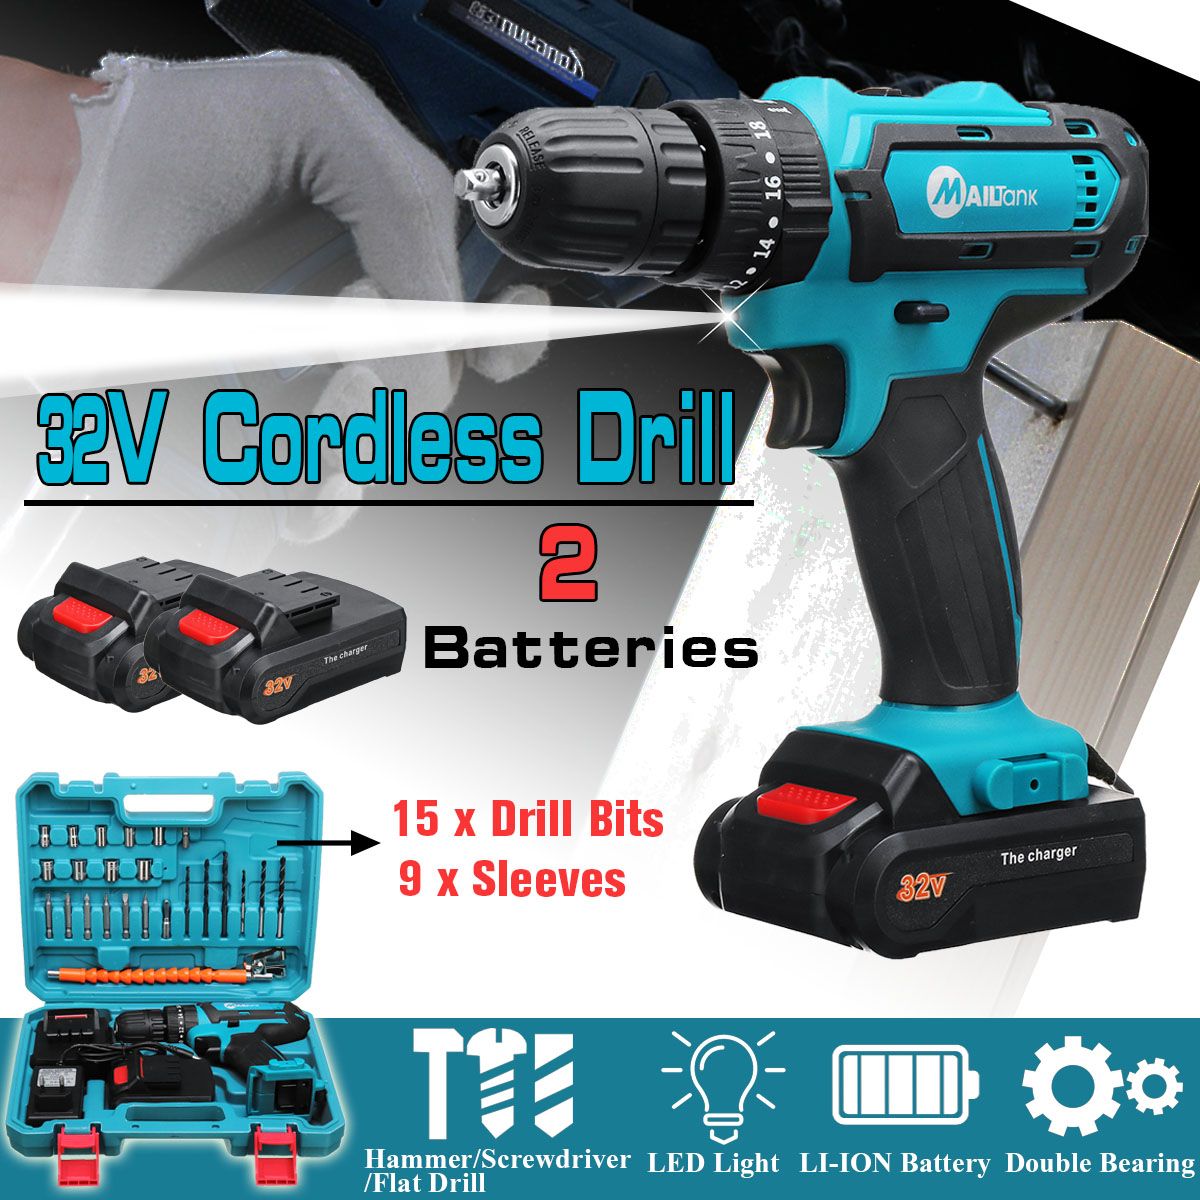 32V-2-Speed-Power-Drills-6000mah-Cordless-Drill-3-IN-1-Electric-Screwdriver-Hammer-Drill-with-2pcs-B-1416071